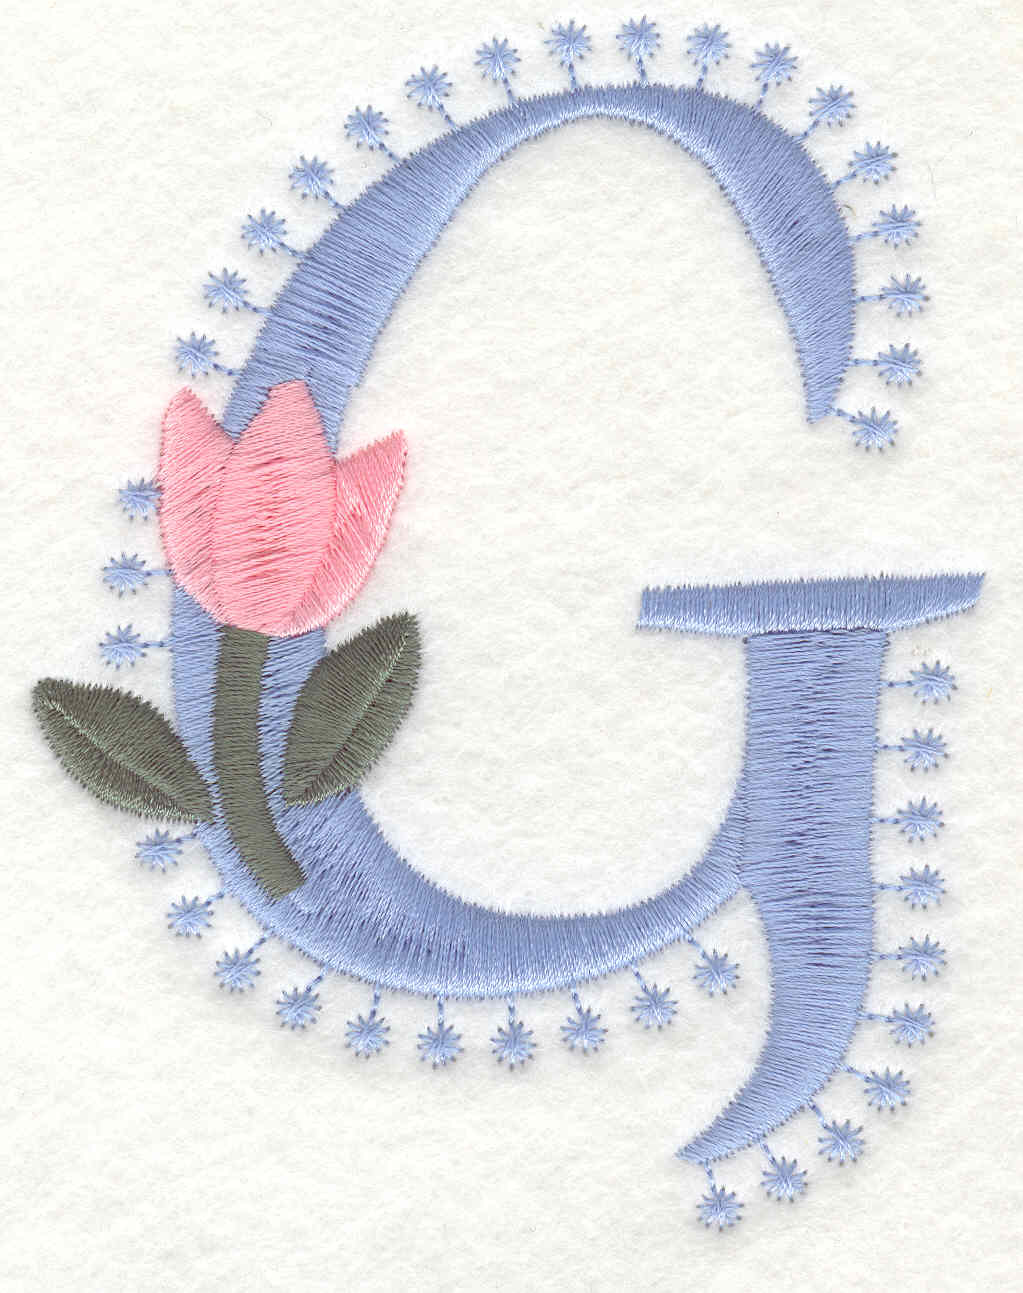 Embroidery Design: G Large4.10inH x 3.20inW